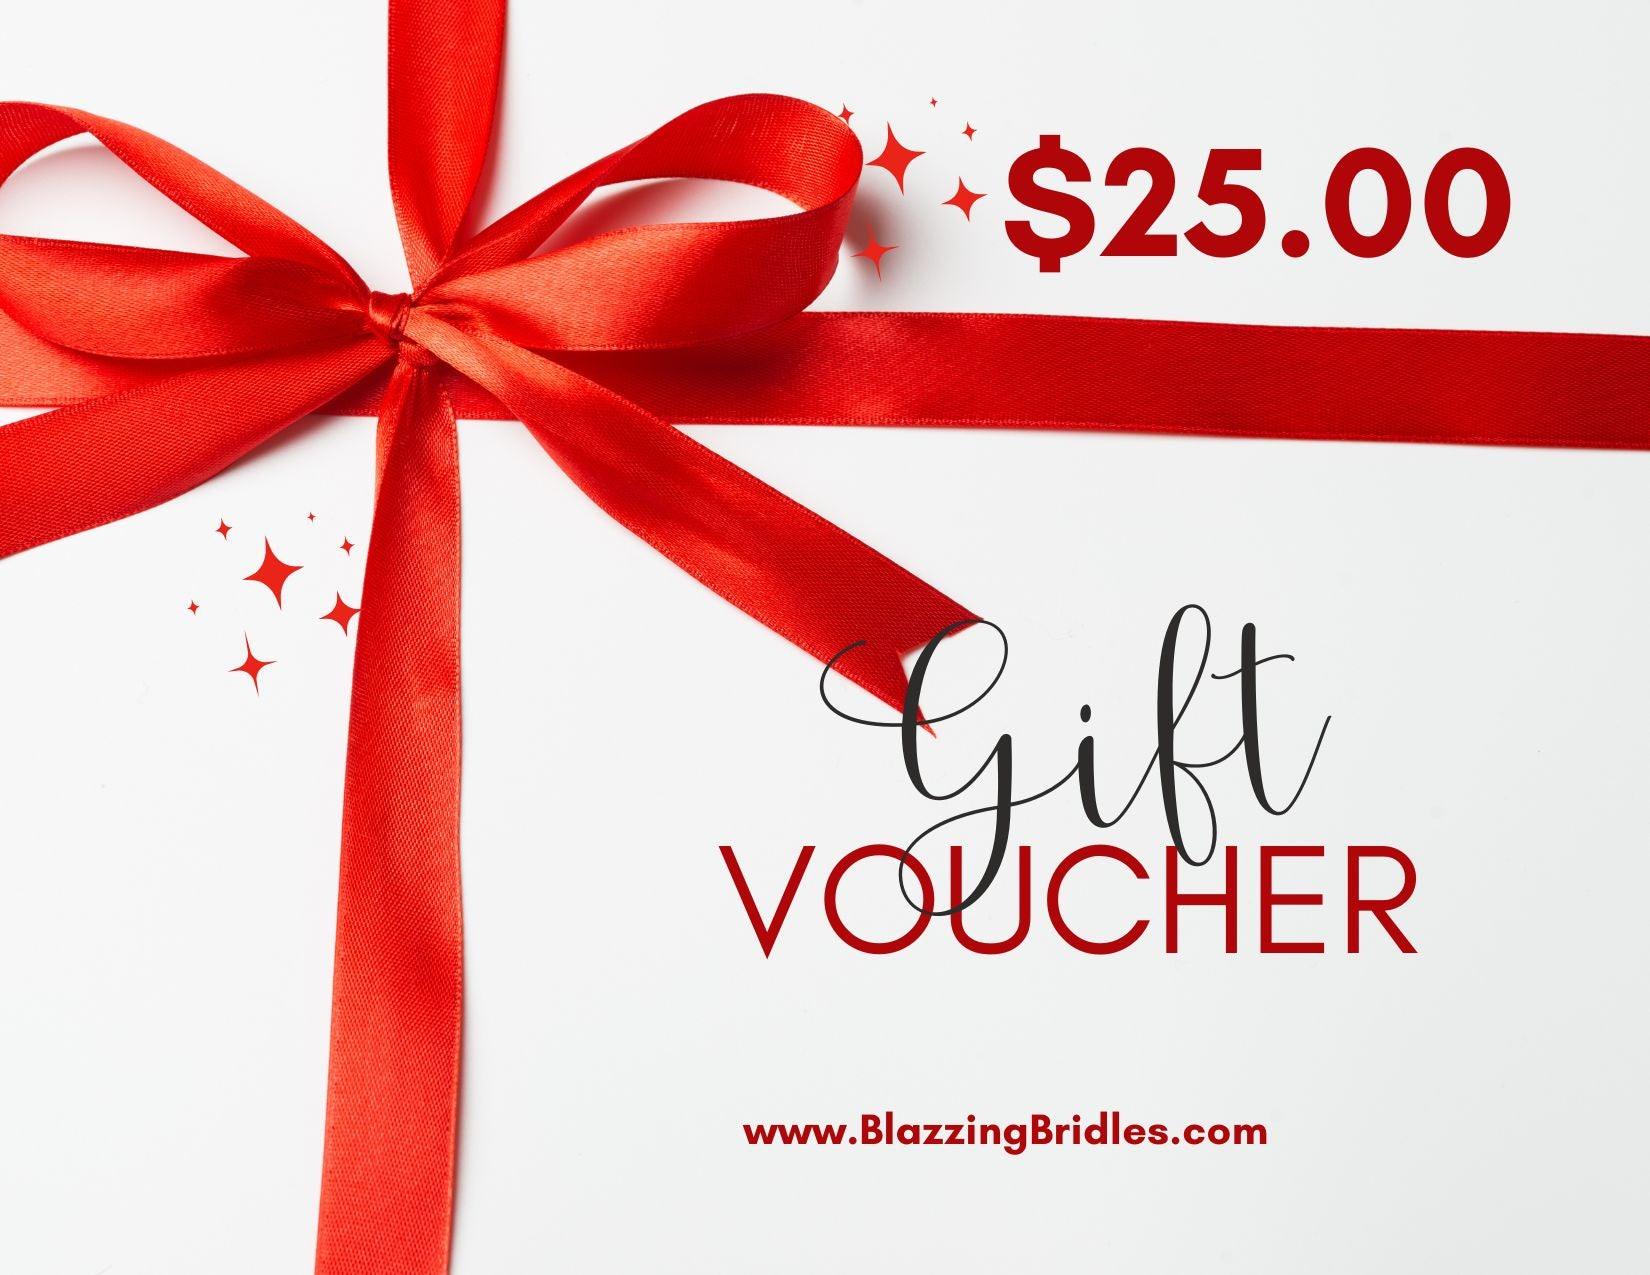 Blazzing Bridles Gift Card - Blazzing Bridles